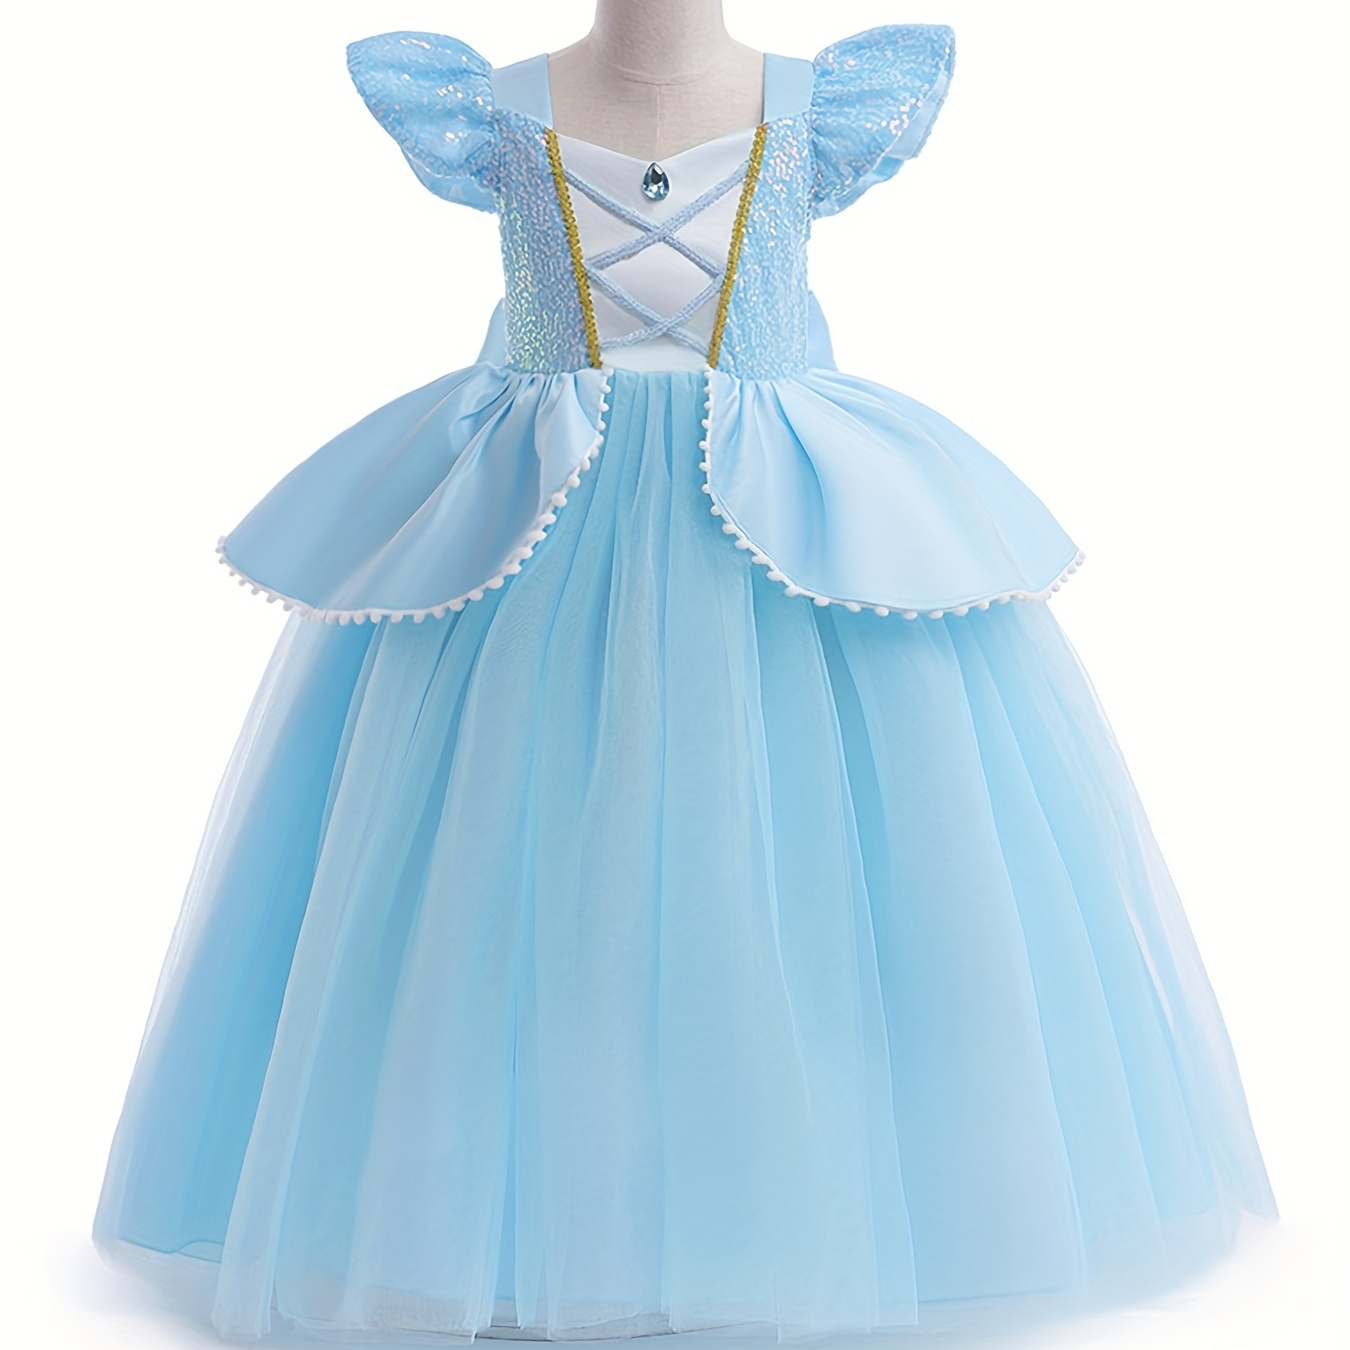 

Girls' Princess Dress With Tulle Satin Waist Elegant Puff Dress Girls Birthday Dresses Party Pageant Dance Party Ball Gown